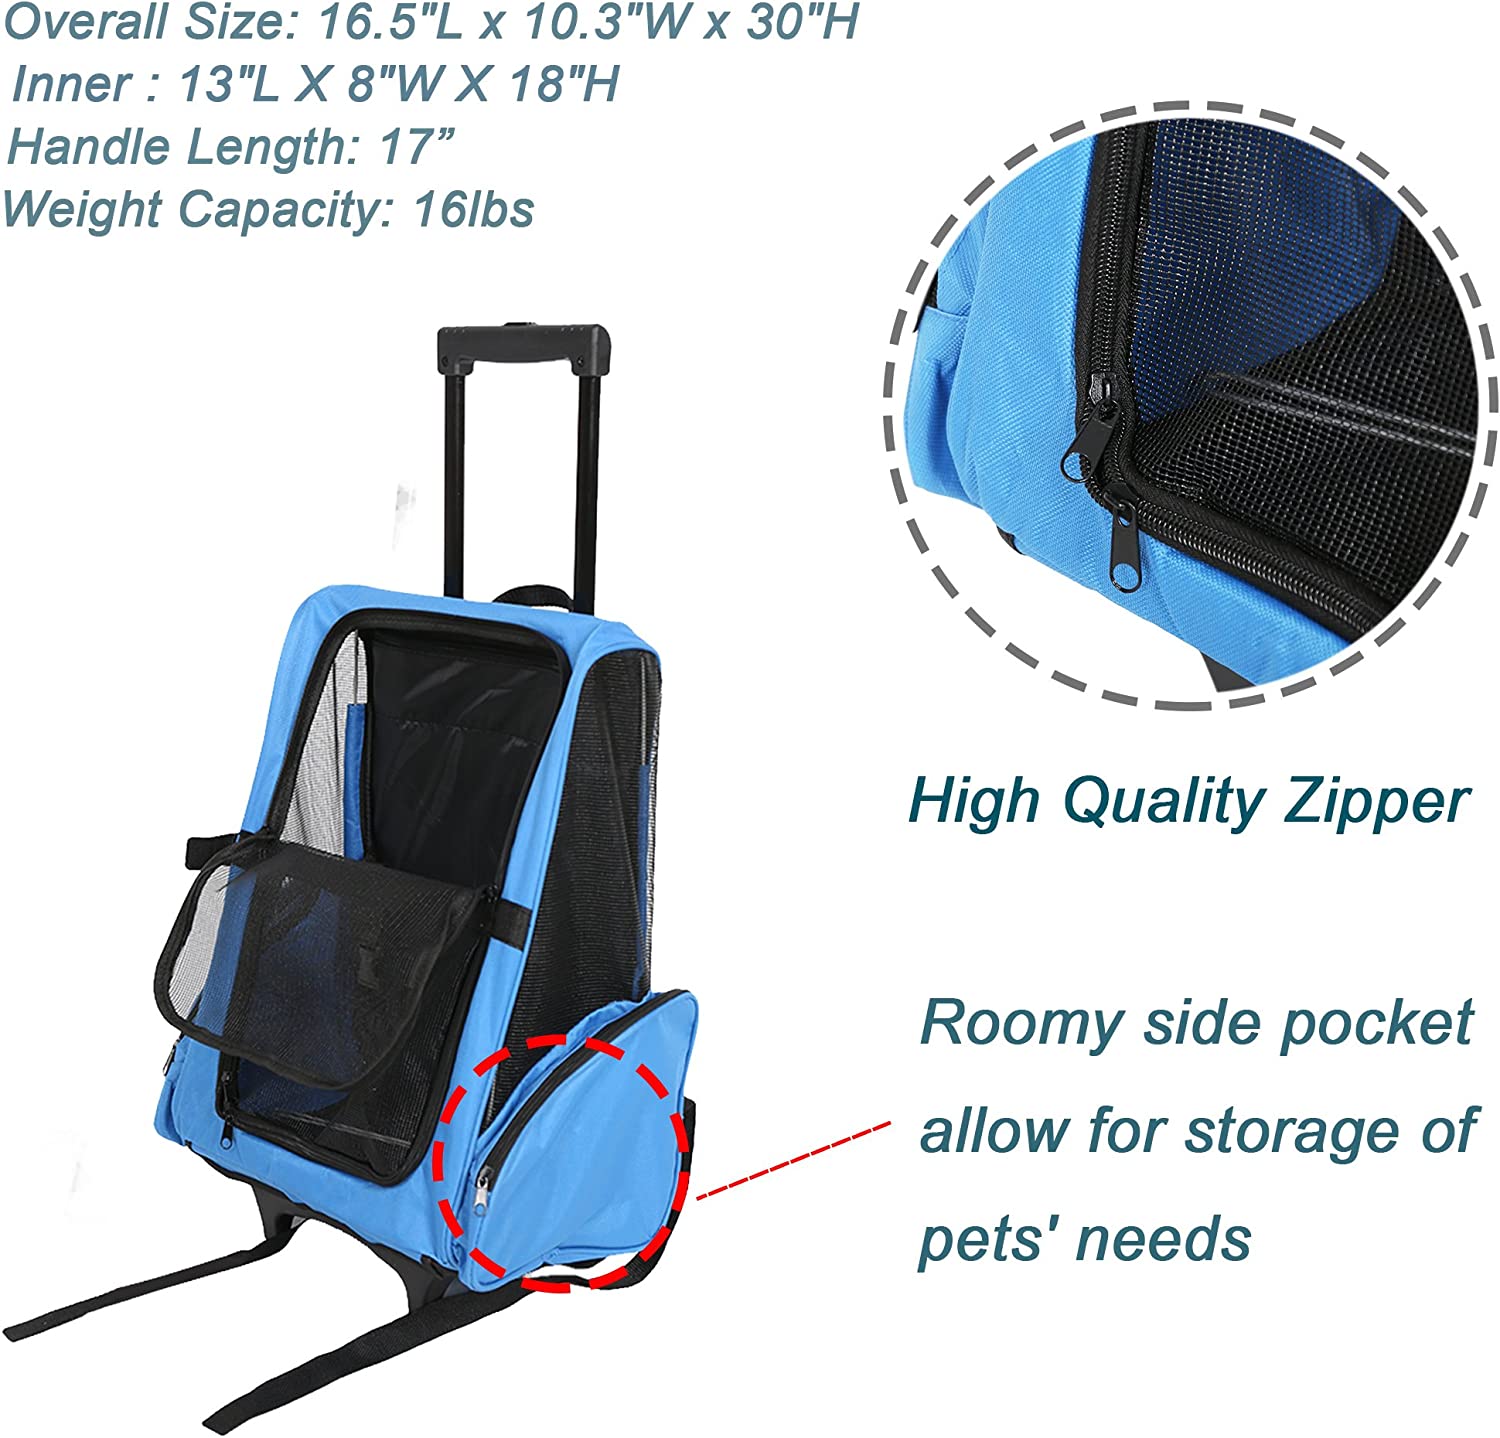 (Out of Stock) Pet Travel Carrier Backpack with Wheels, Soft Oxford Rolling Luggage Bag for Cat Dog Small Animal